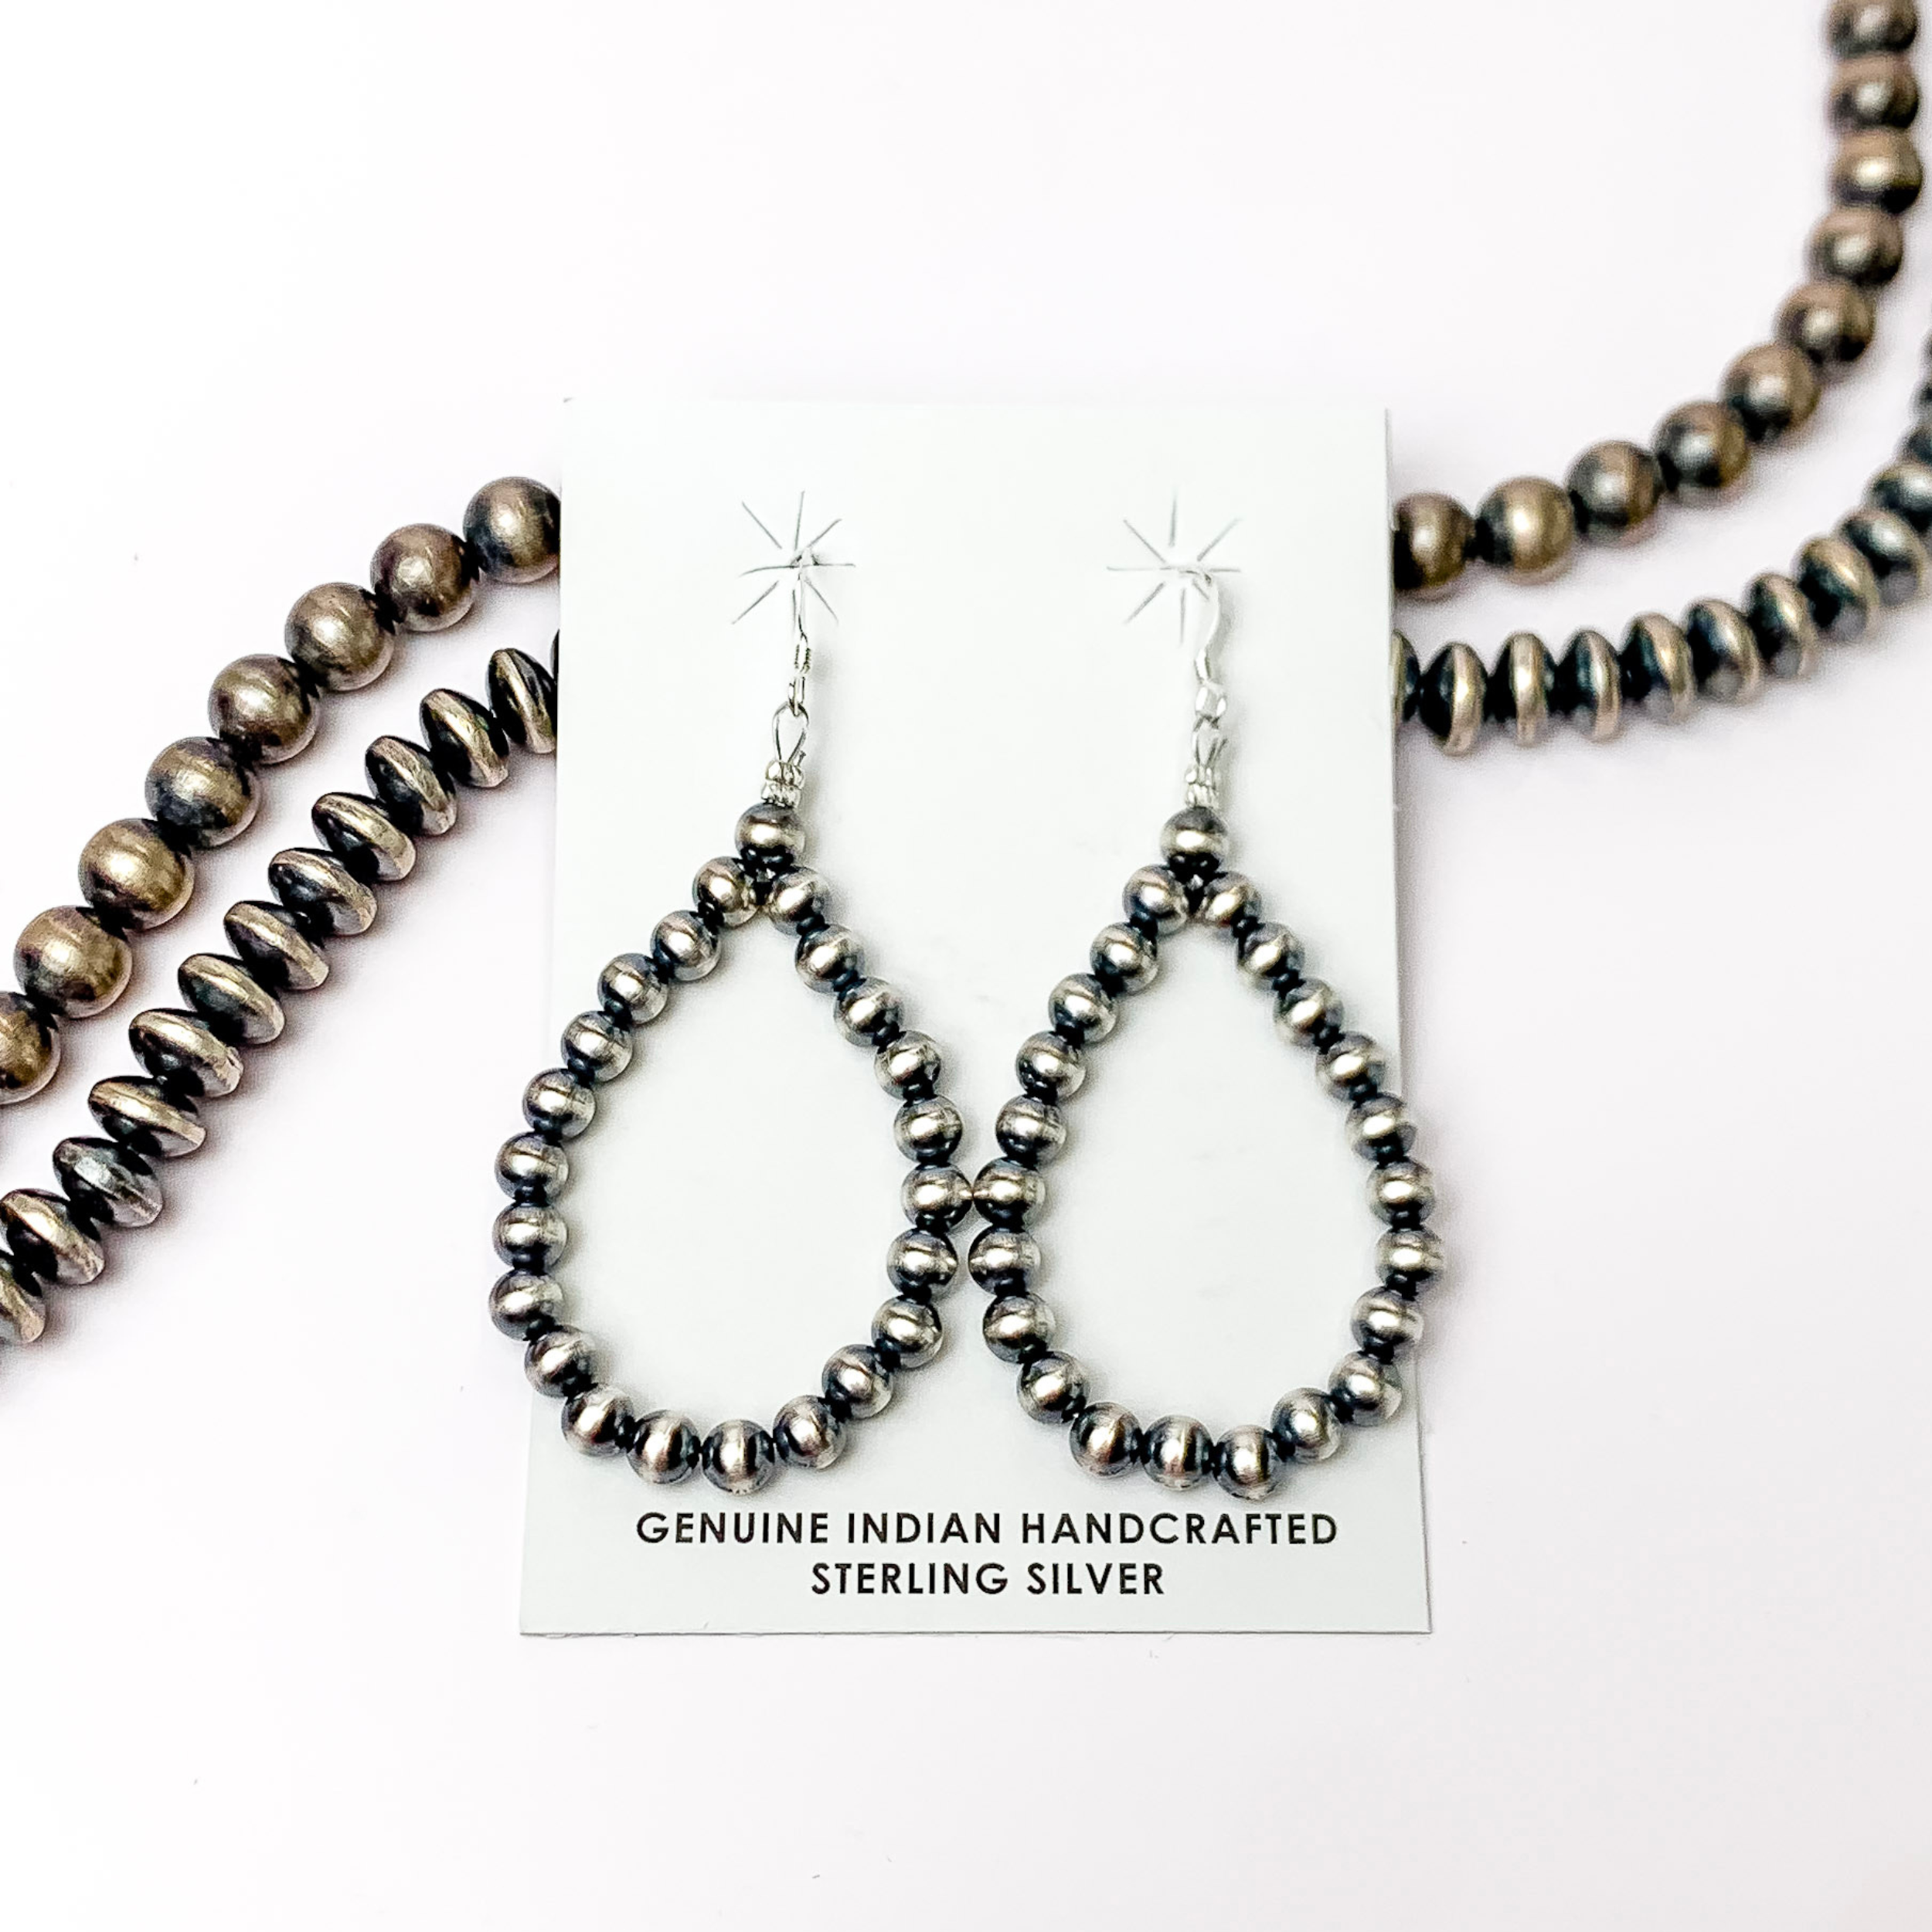 Centered in the picture Navajo pearl drop earrings with a white background.  